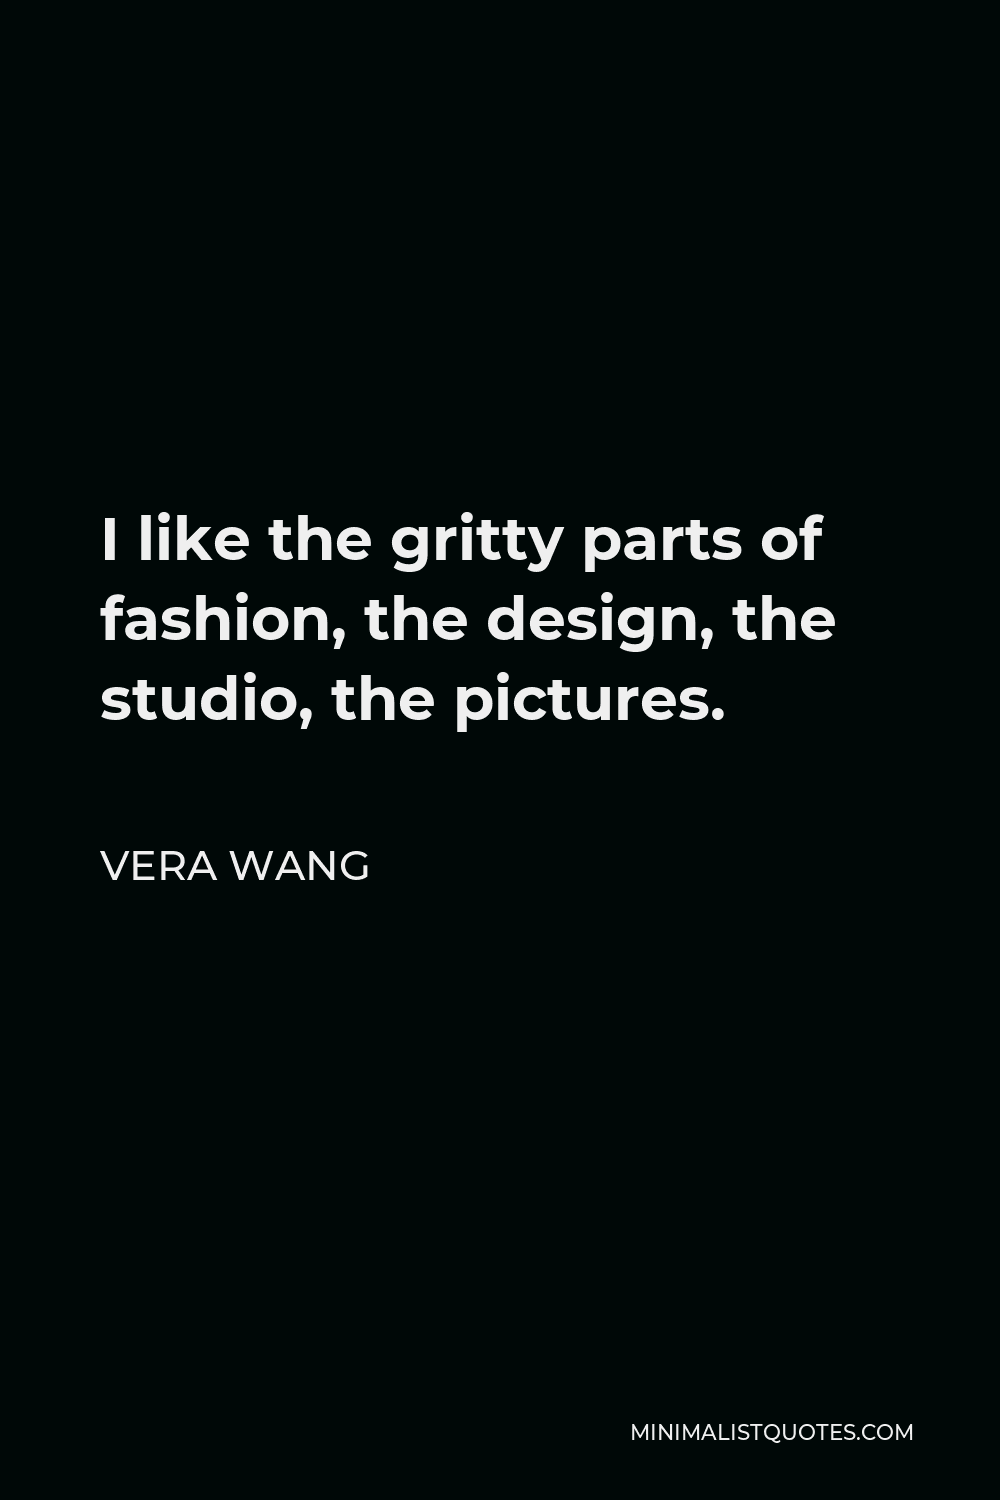 Vera Wang Quote - I like the gritty parts of fashion, the design, the studio, the pictures.